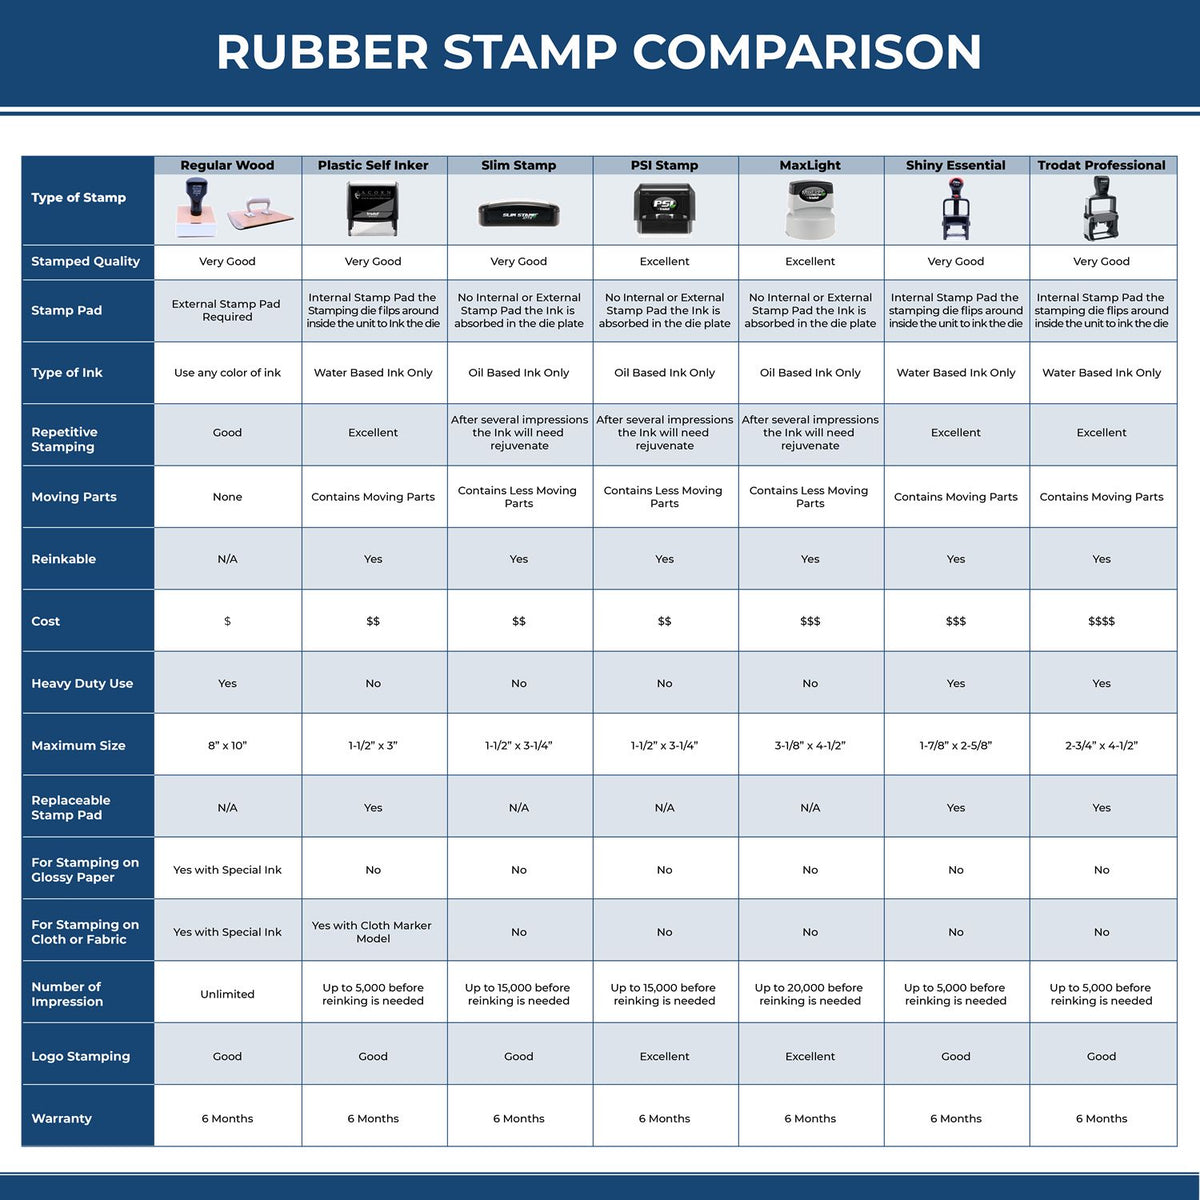 Large Self-Inking Classified Stamp 4888S Rubber Stamp Comparison